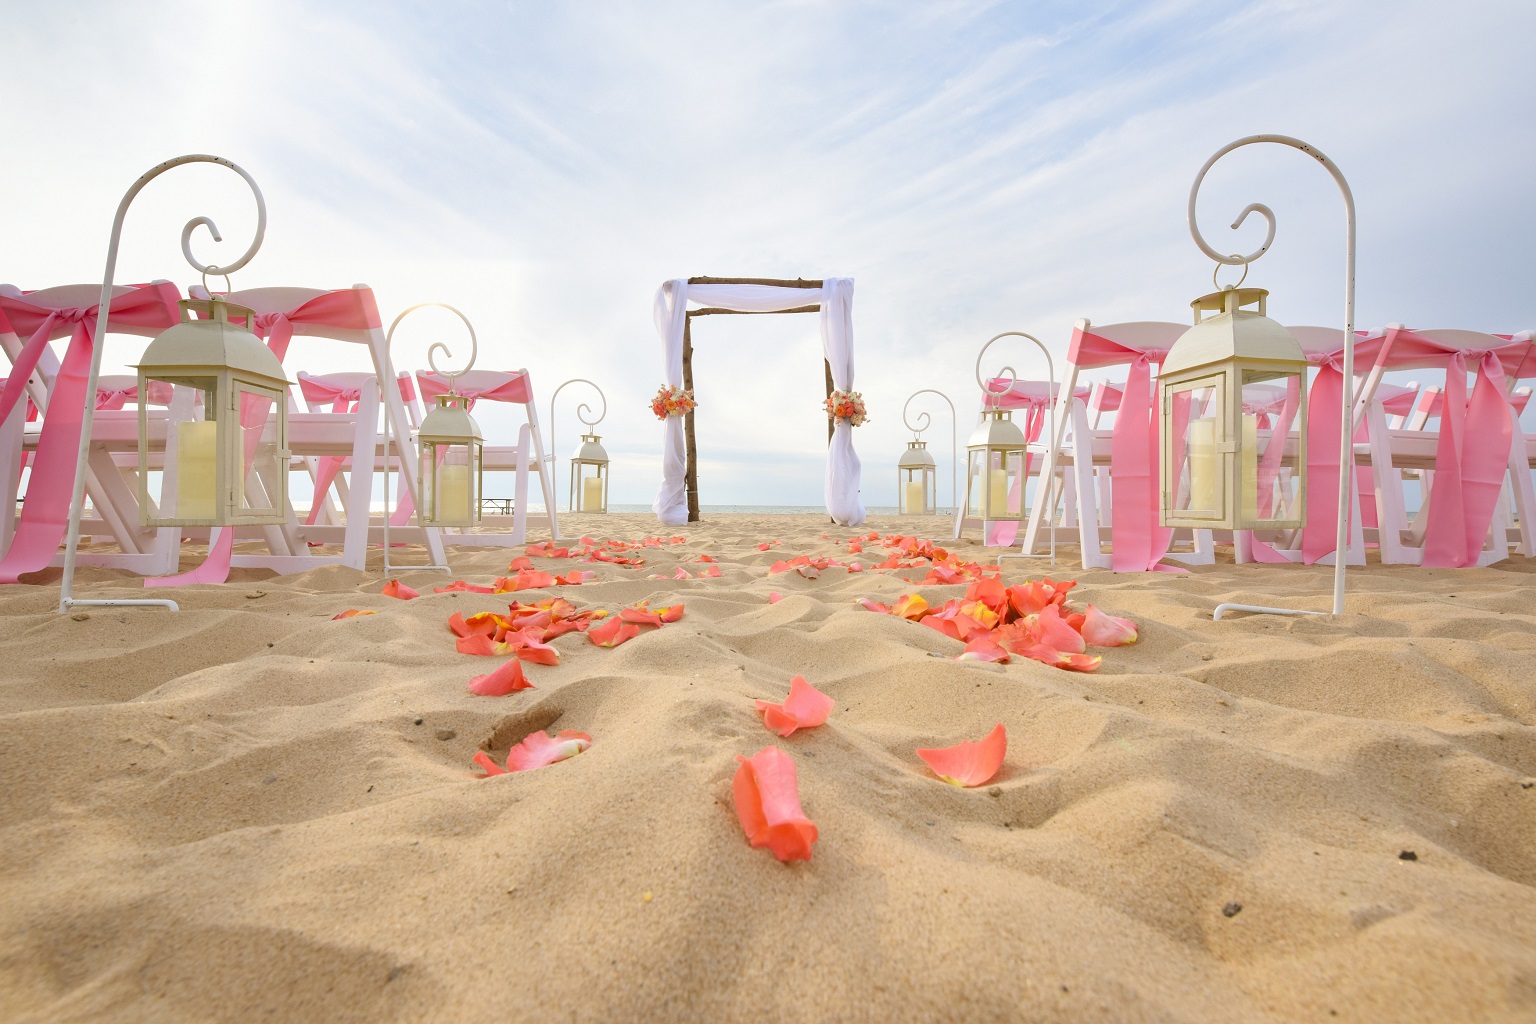 get hitched quick in saugatuck,wedding packages, elope in michigan, beach wedding in south haven mi, beach weddings, michigan wedding planner, elope in michigan, Wedding Planner, beach wedding arbor and chairs, lake michigan wedding